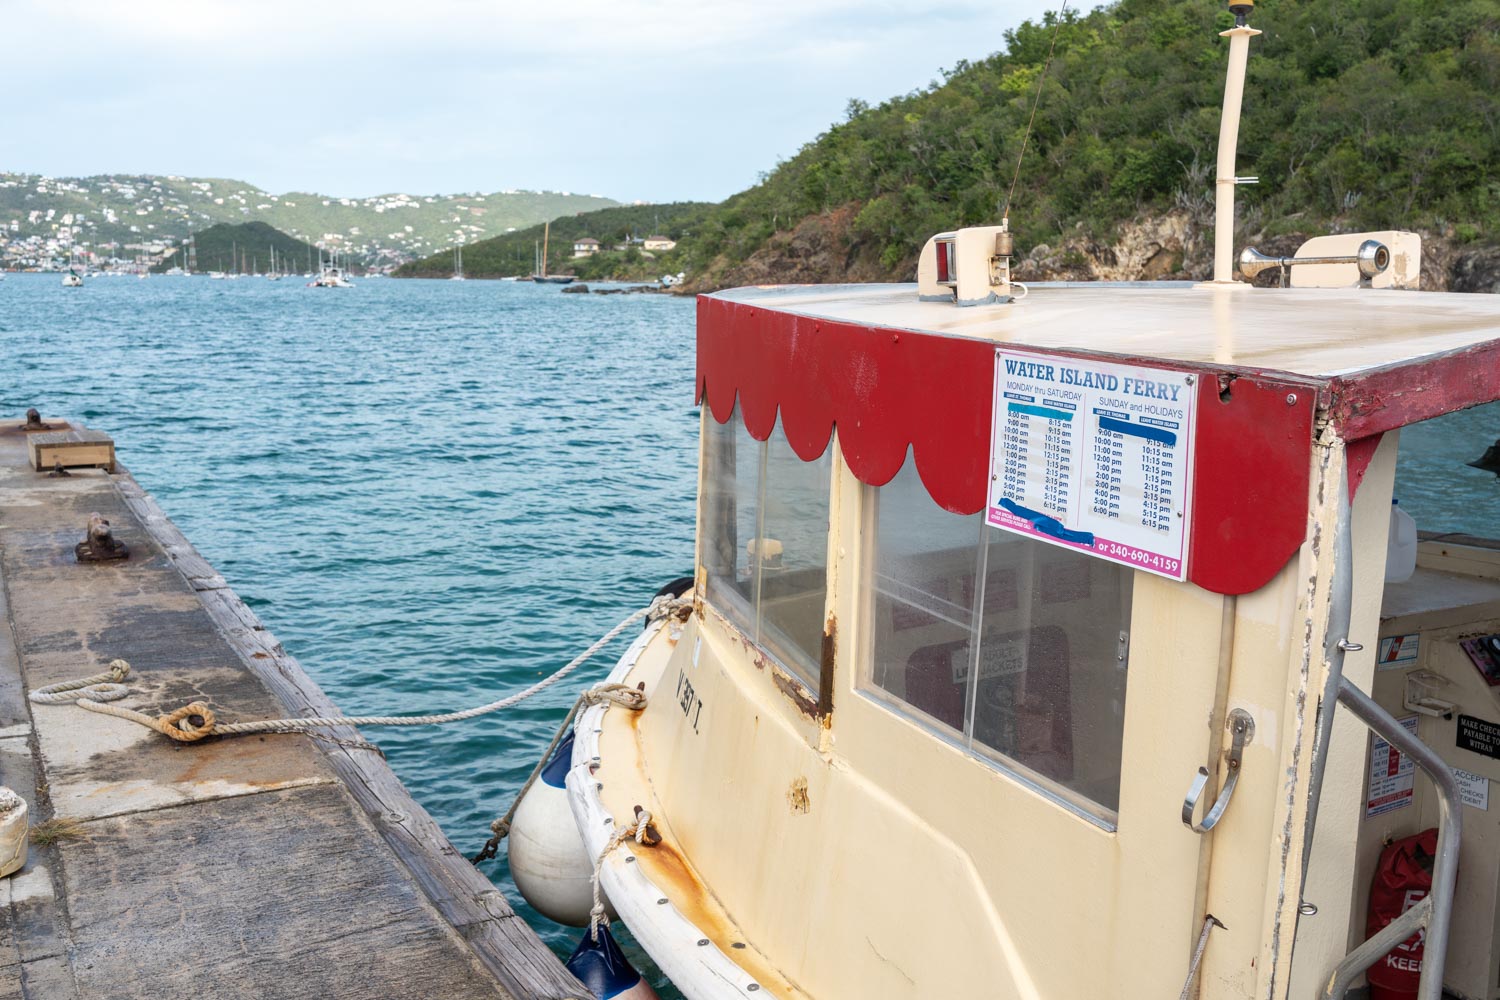 Taking the ferry from St. Thomas to Water Island.